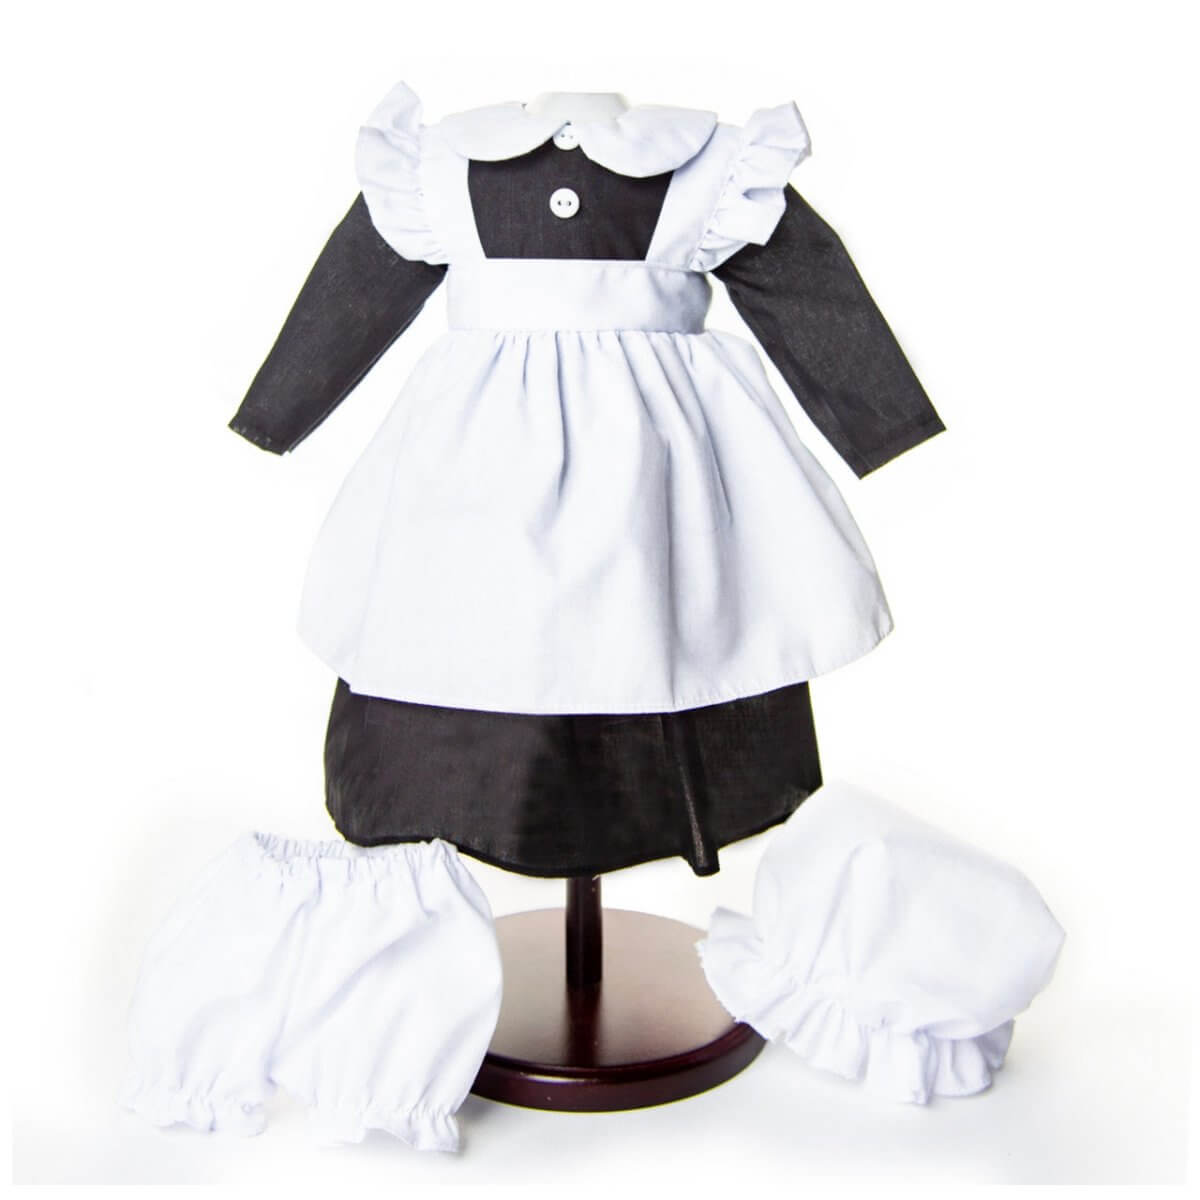 4 Piece Scullery Kitchen Maid Outfit, Doll Clothes for 18 Inch Dolls - Simon's Collectibles